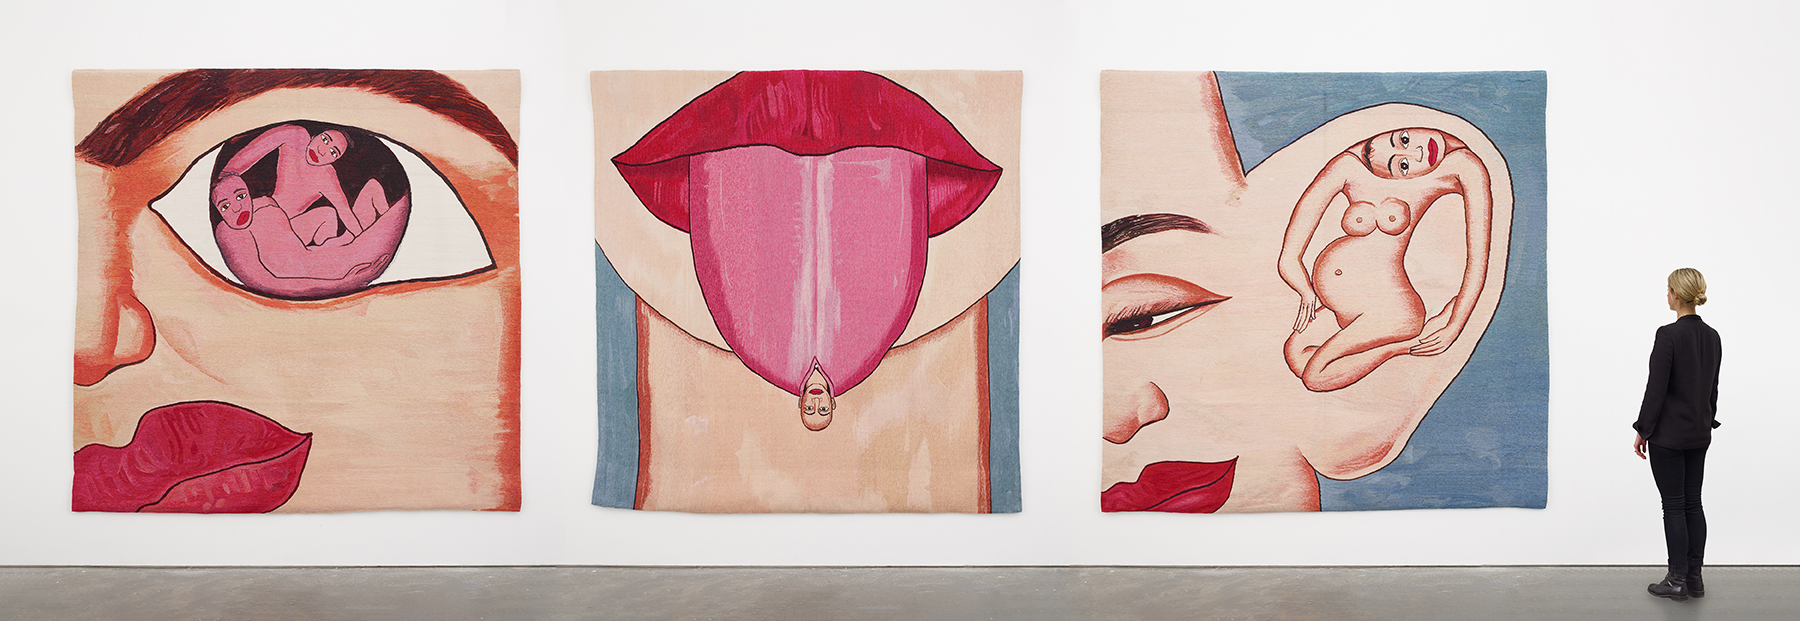 Scale view of Francesco Clemente's tapestry The Senses